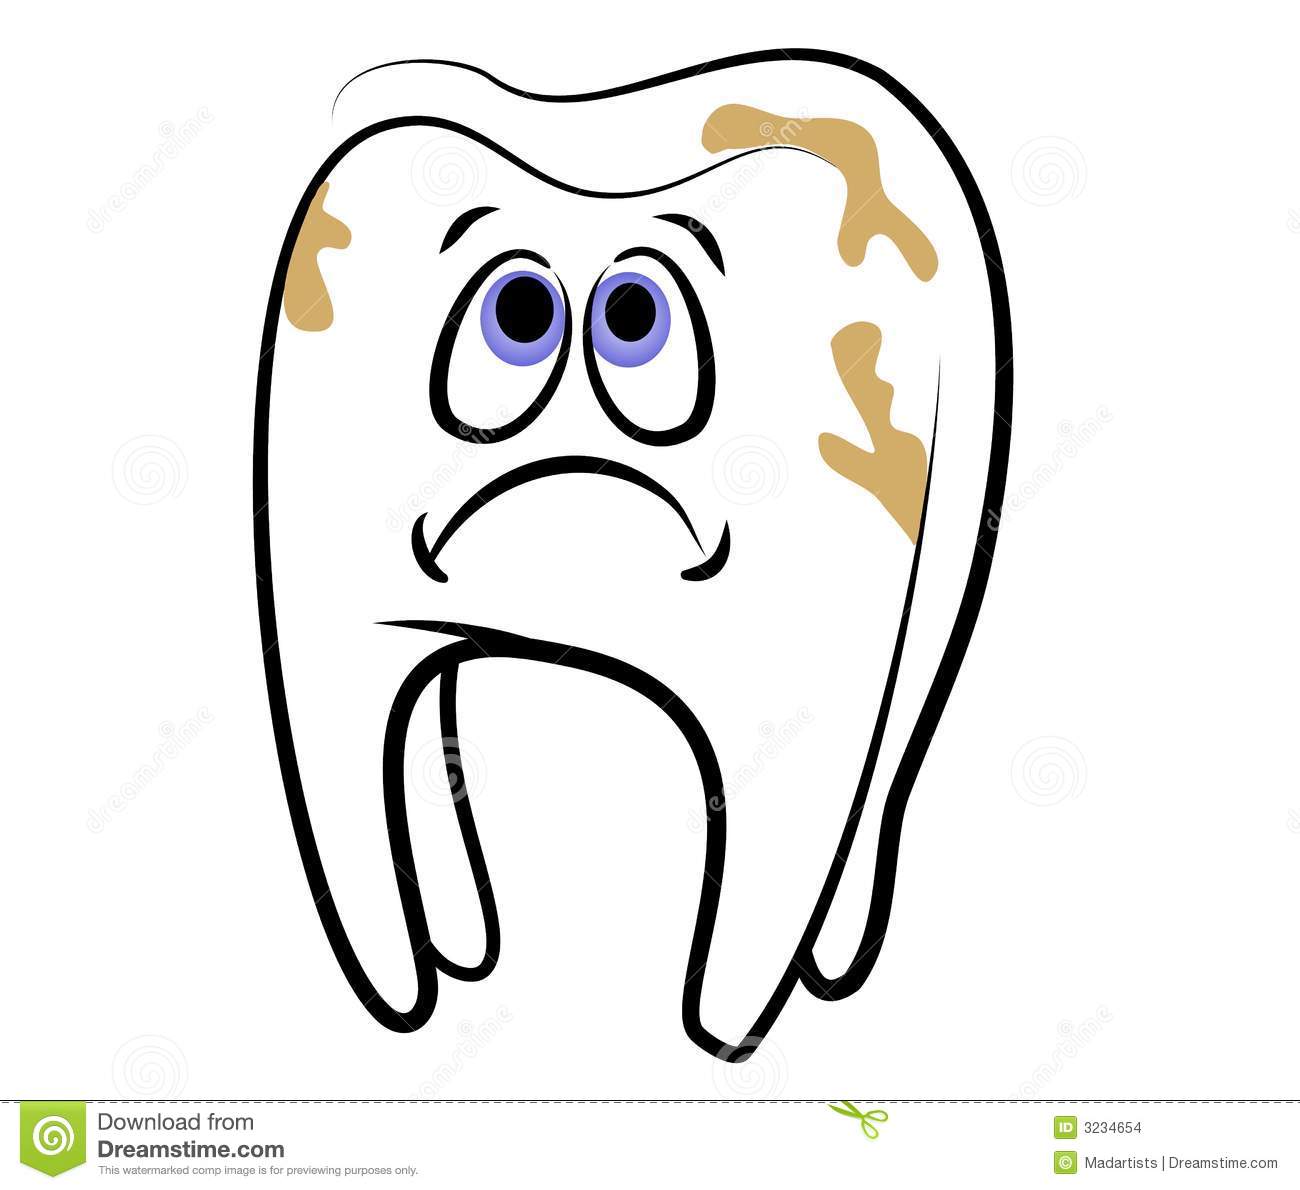 Clip Art Illustration Of A Cartoonish Looking White Tooth With A Sad